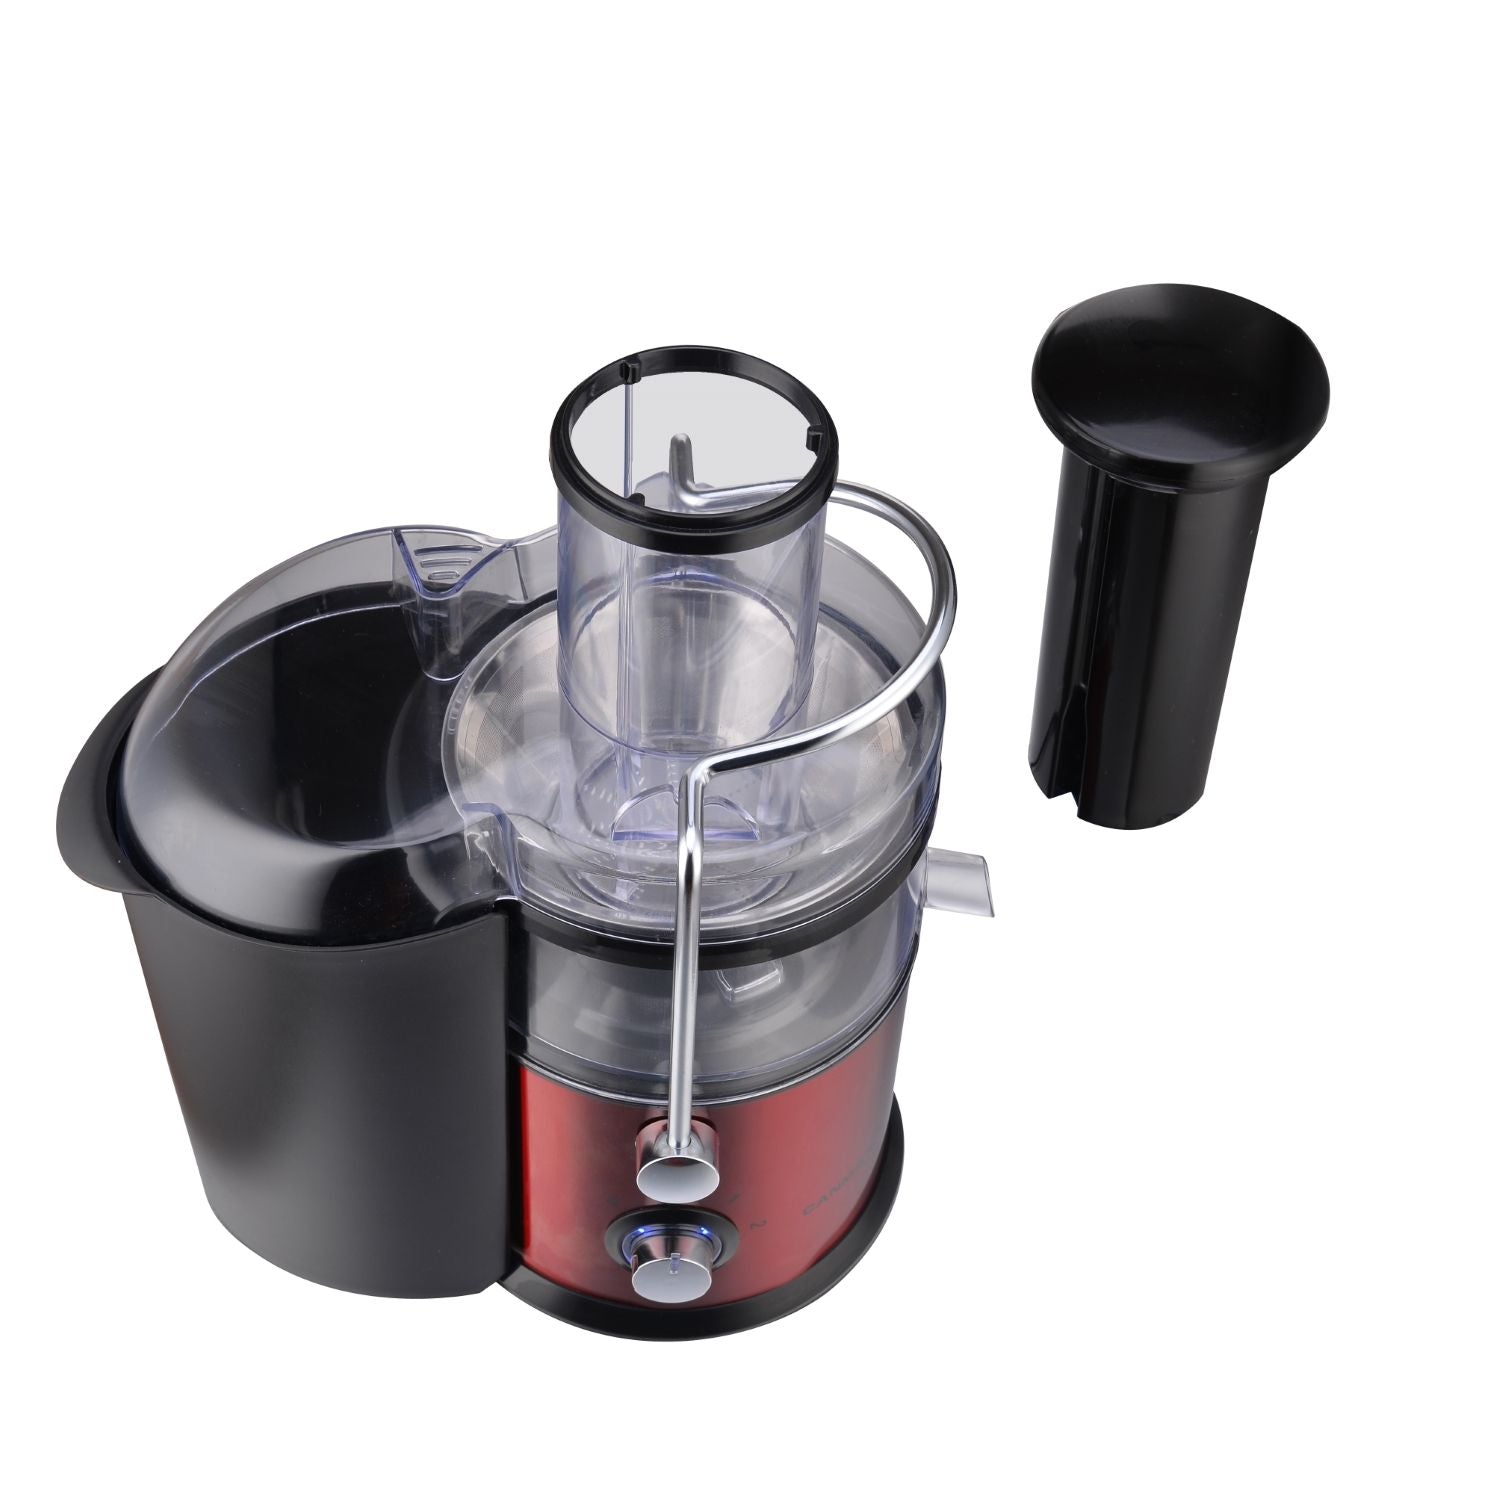 Geepas GJE5437 Centrifugal Juicer | 800W Juicer Machine | Juice Extractor With 75MM Wide Mouth For Whole Fruit And Vegetable | 2 Speed, Stainless Steel Body, Non-Slip Feet | 2 Year Warranty